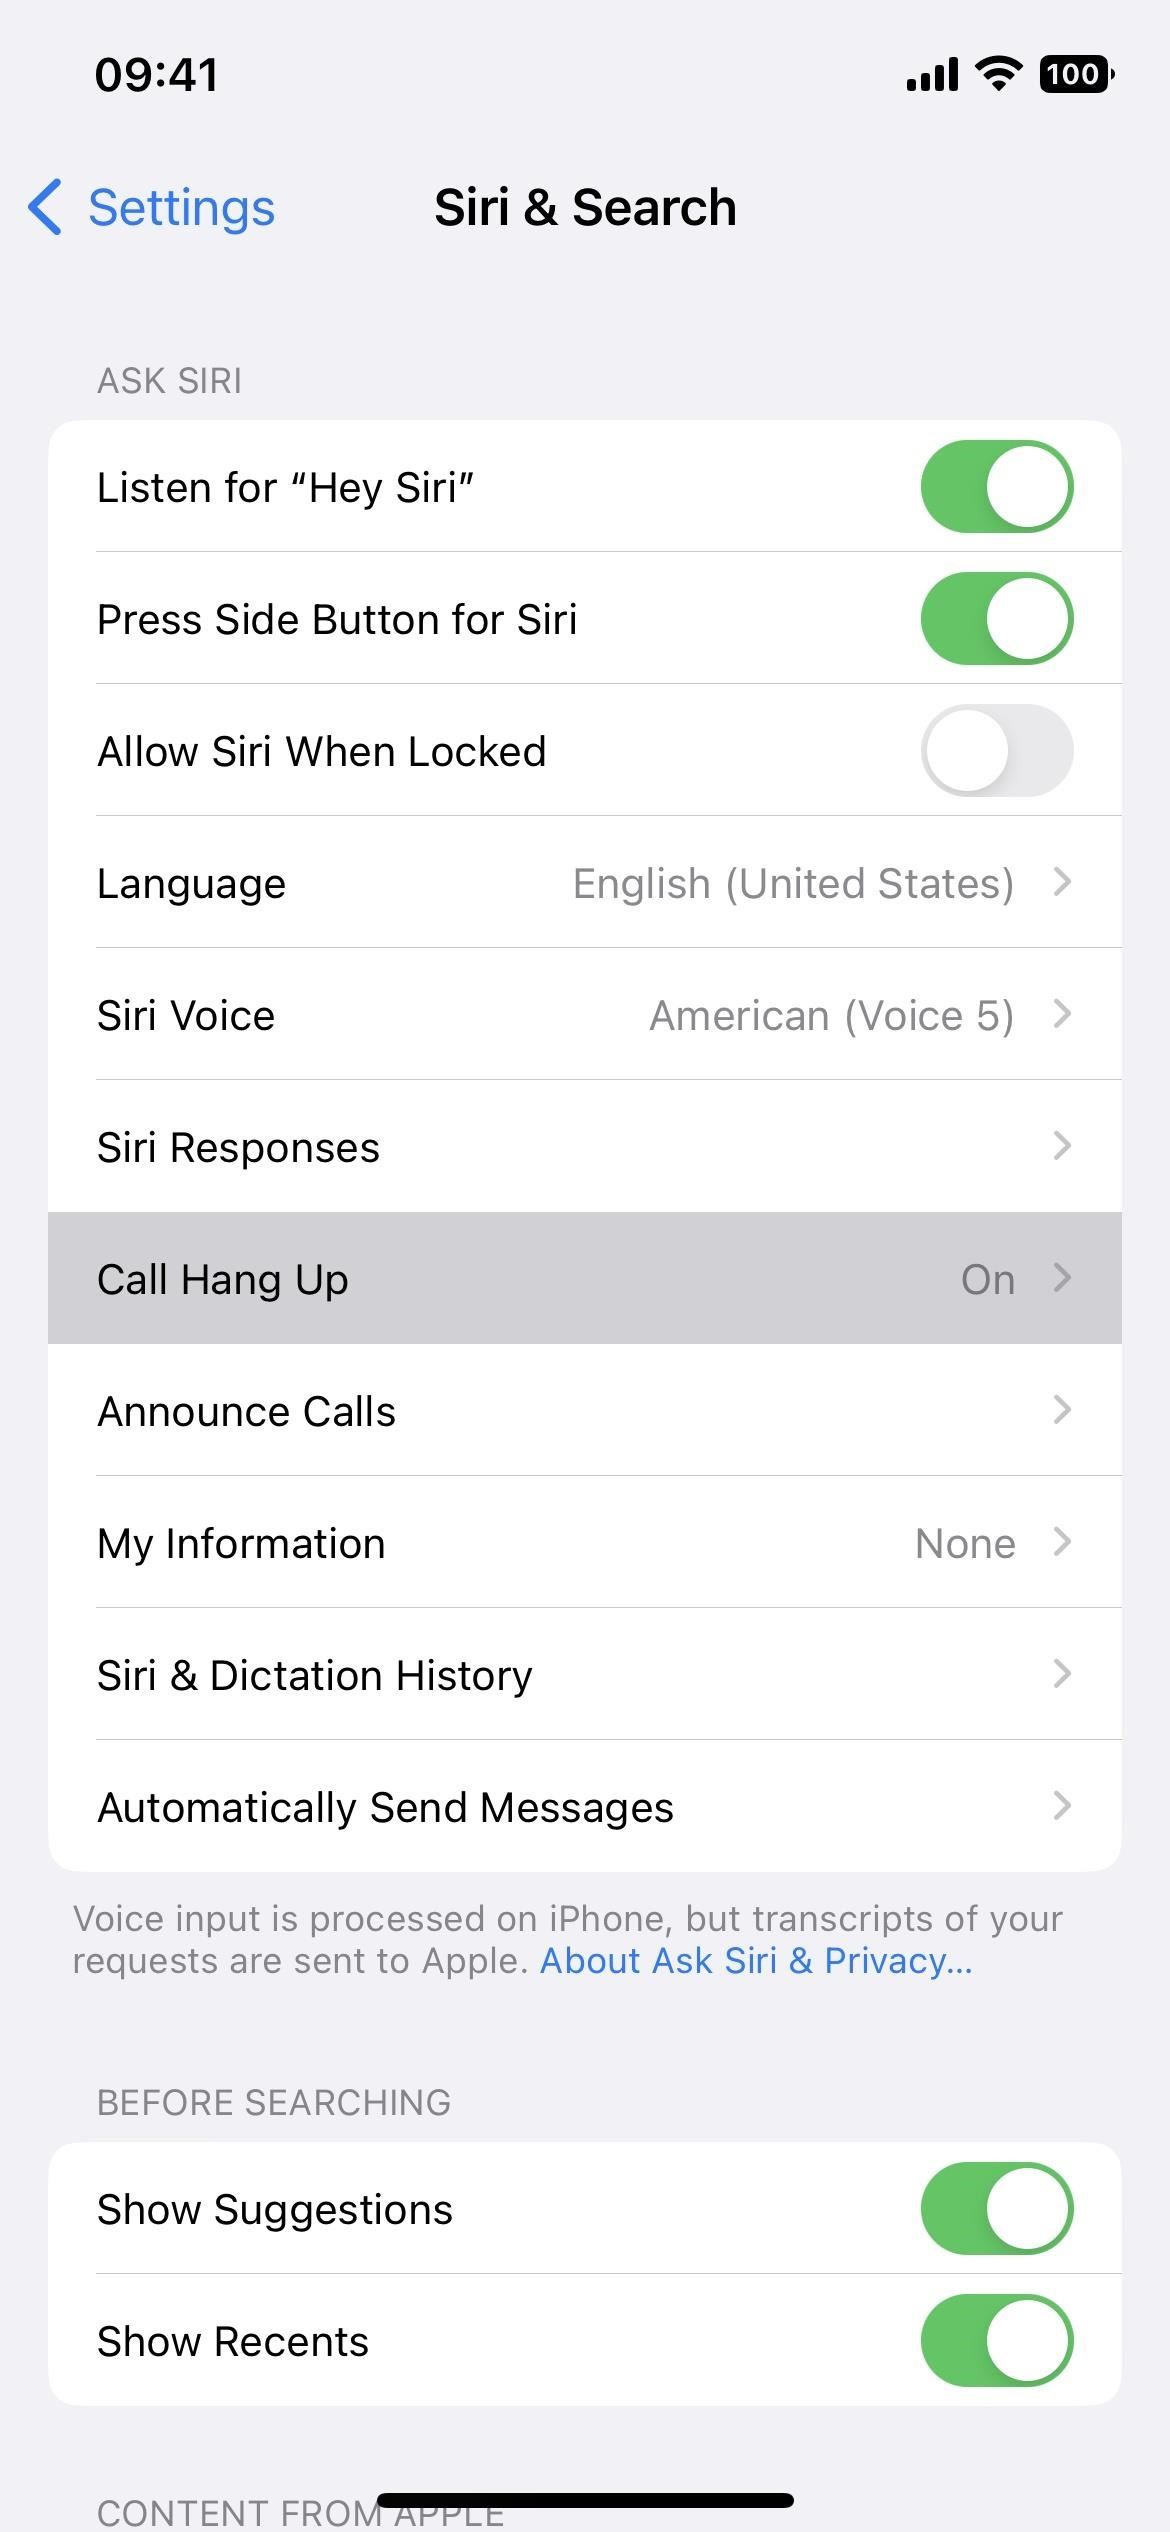 The Massive Accessibility Update for iPhone You Shouldn't Ignore